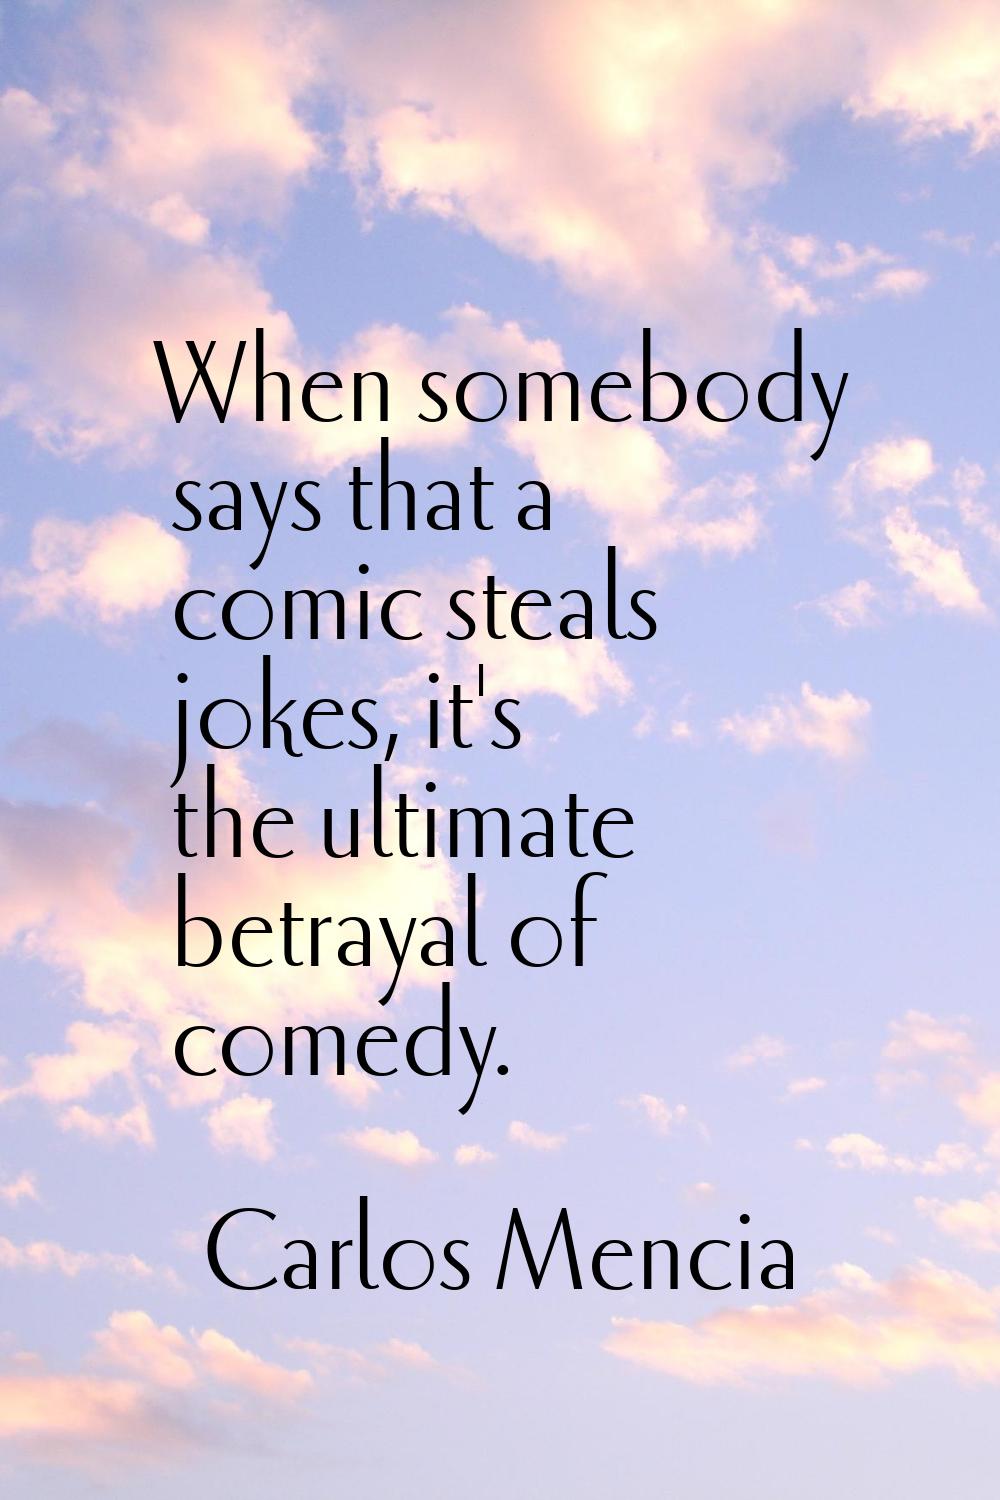 When somebody says that a comic steals jokes, it's the ultimate betrayal of comedy.